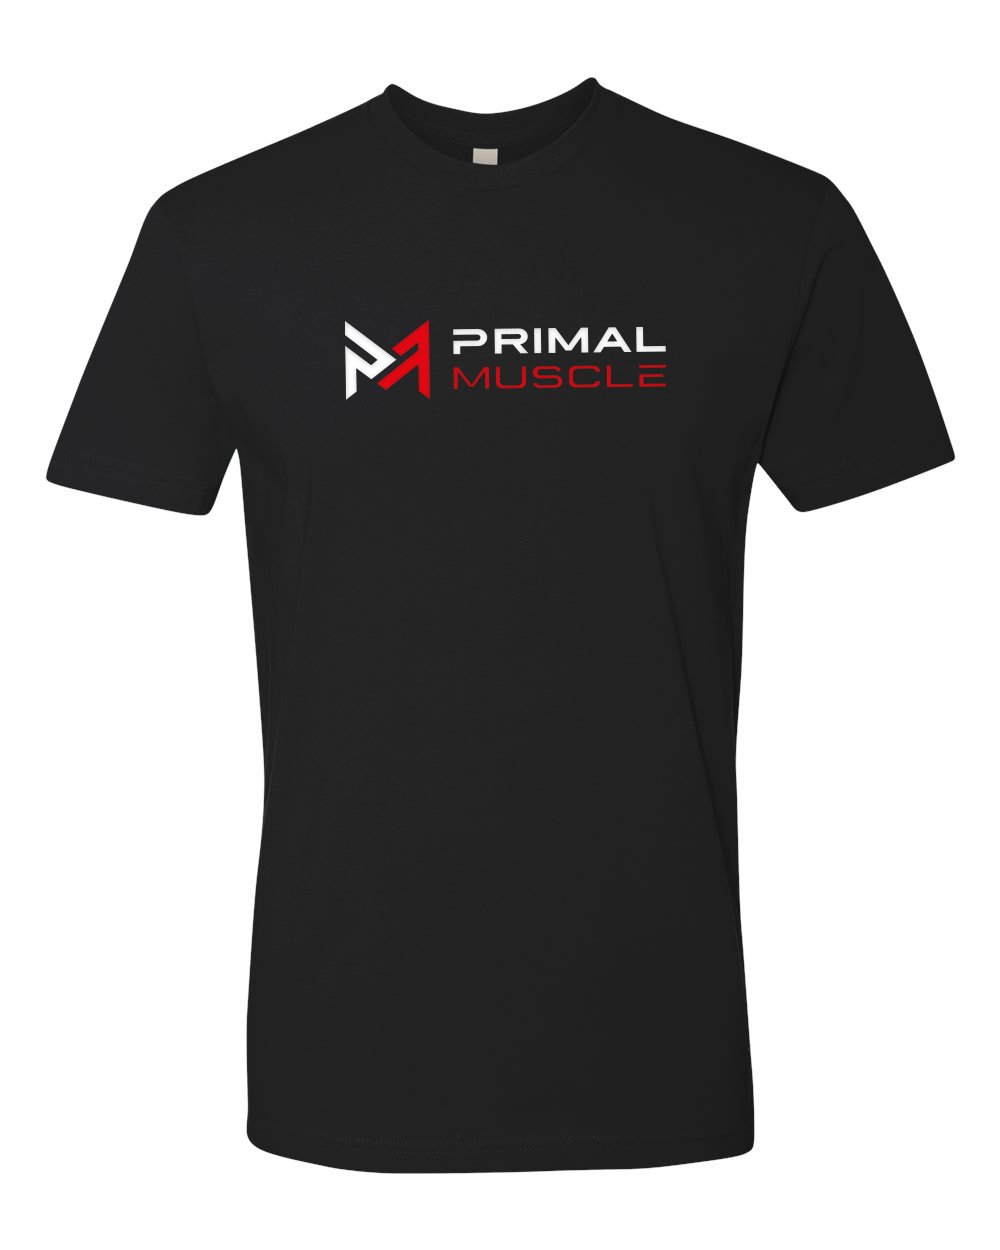 Primal Muscle T-Shirt